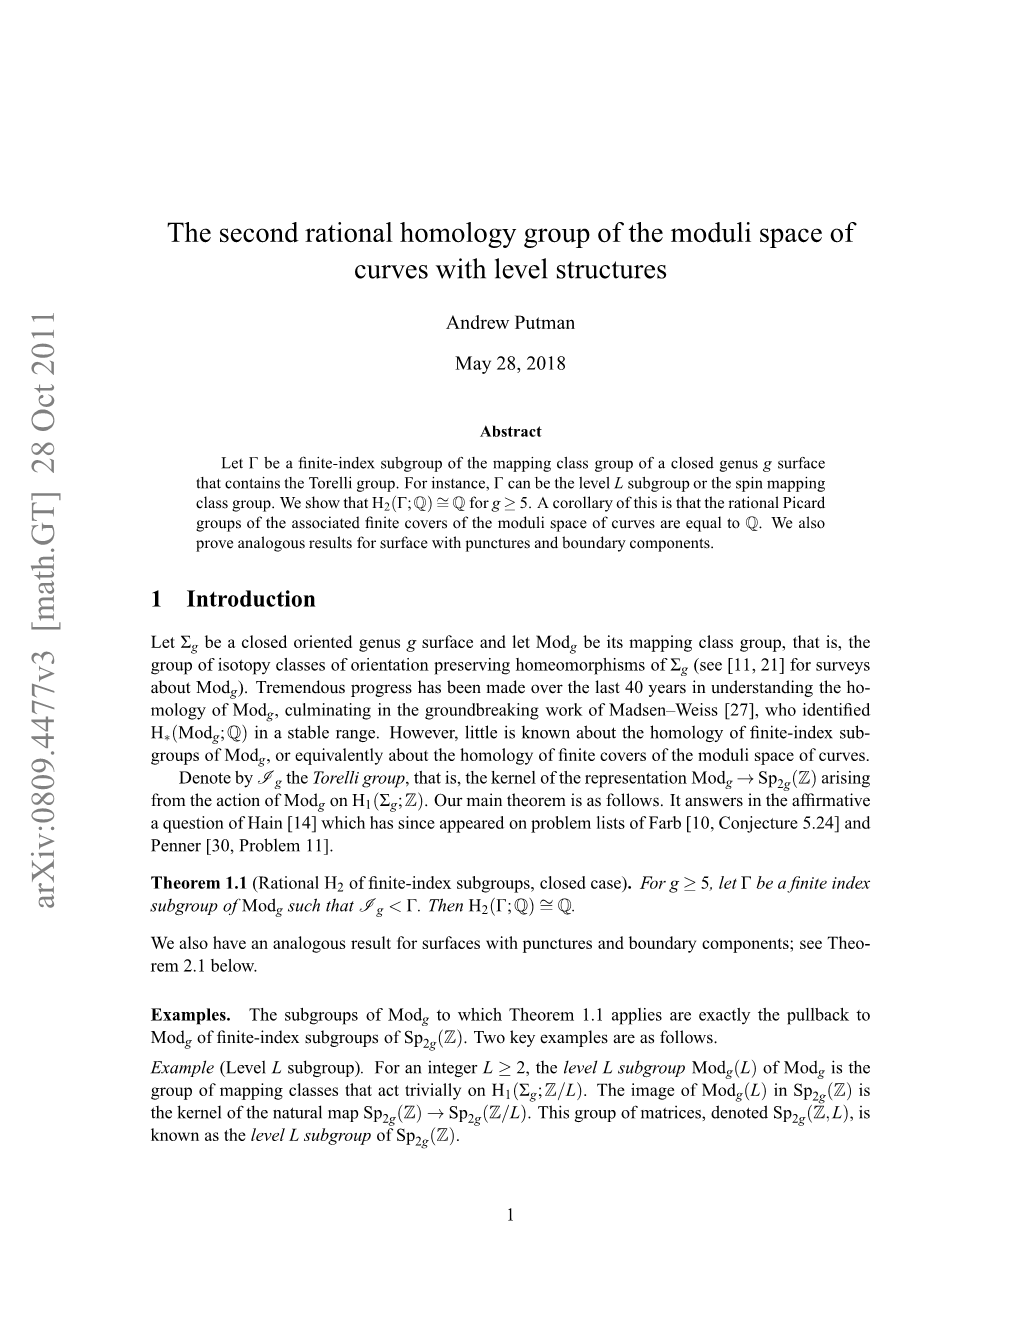 The Second Rational Homology Group of the Moduli Space of Curves With